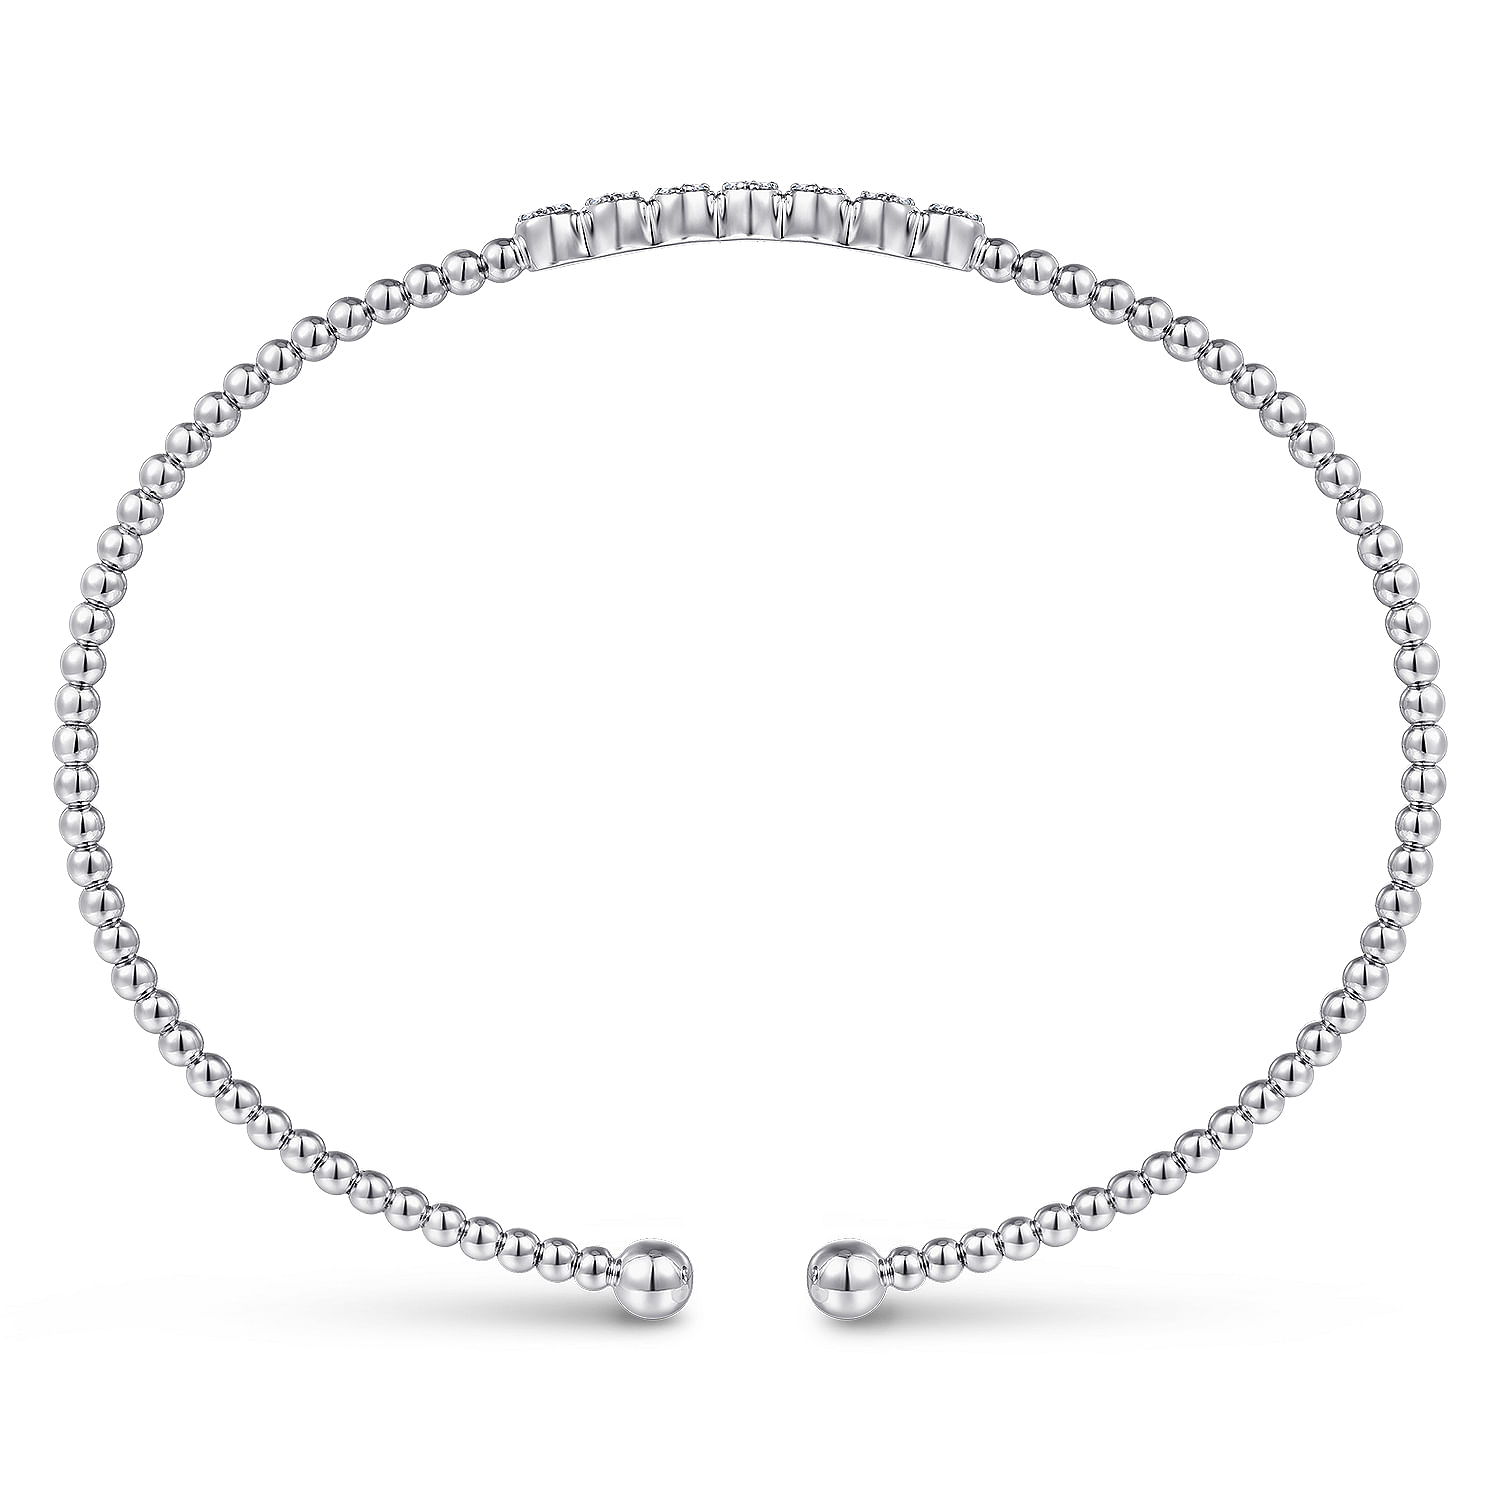 14K White Gold Bujukan Bead Cuff Bracelet with Cluster Diamond Stations - 0.14 ct - Shot 3